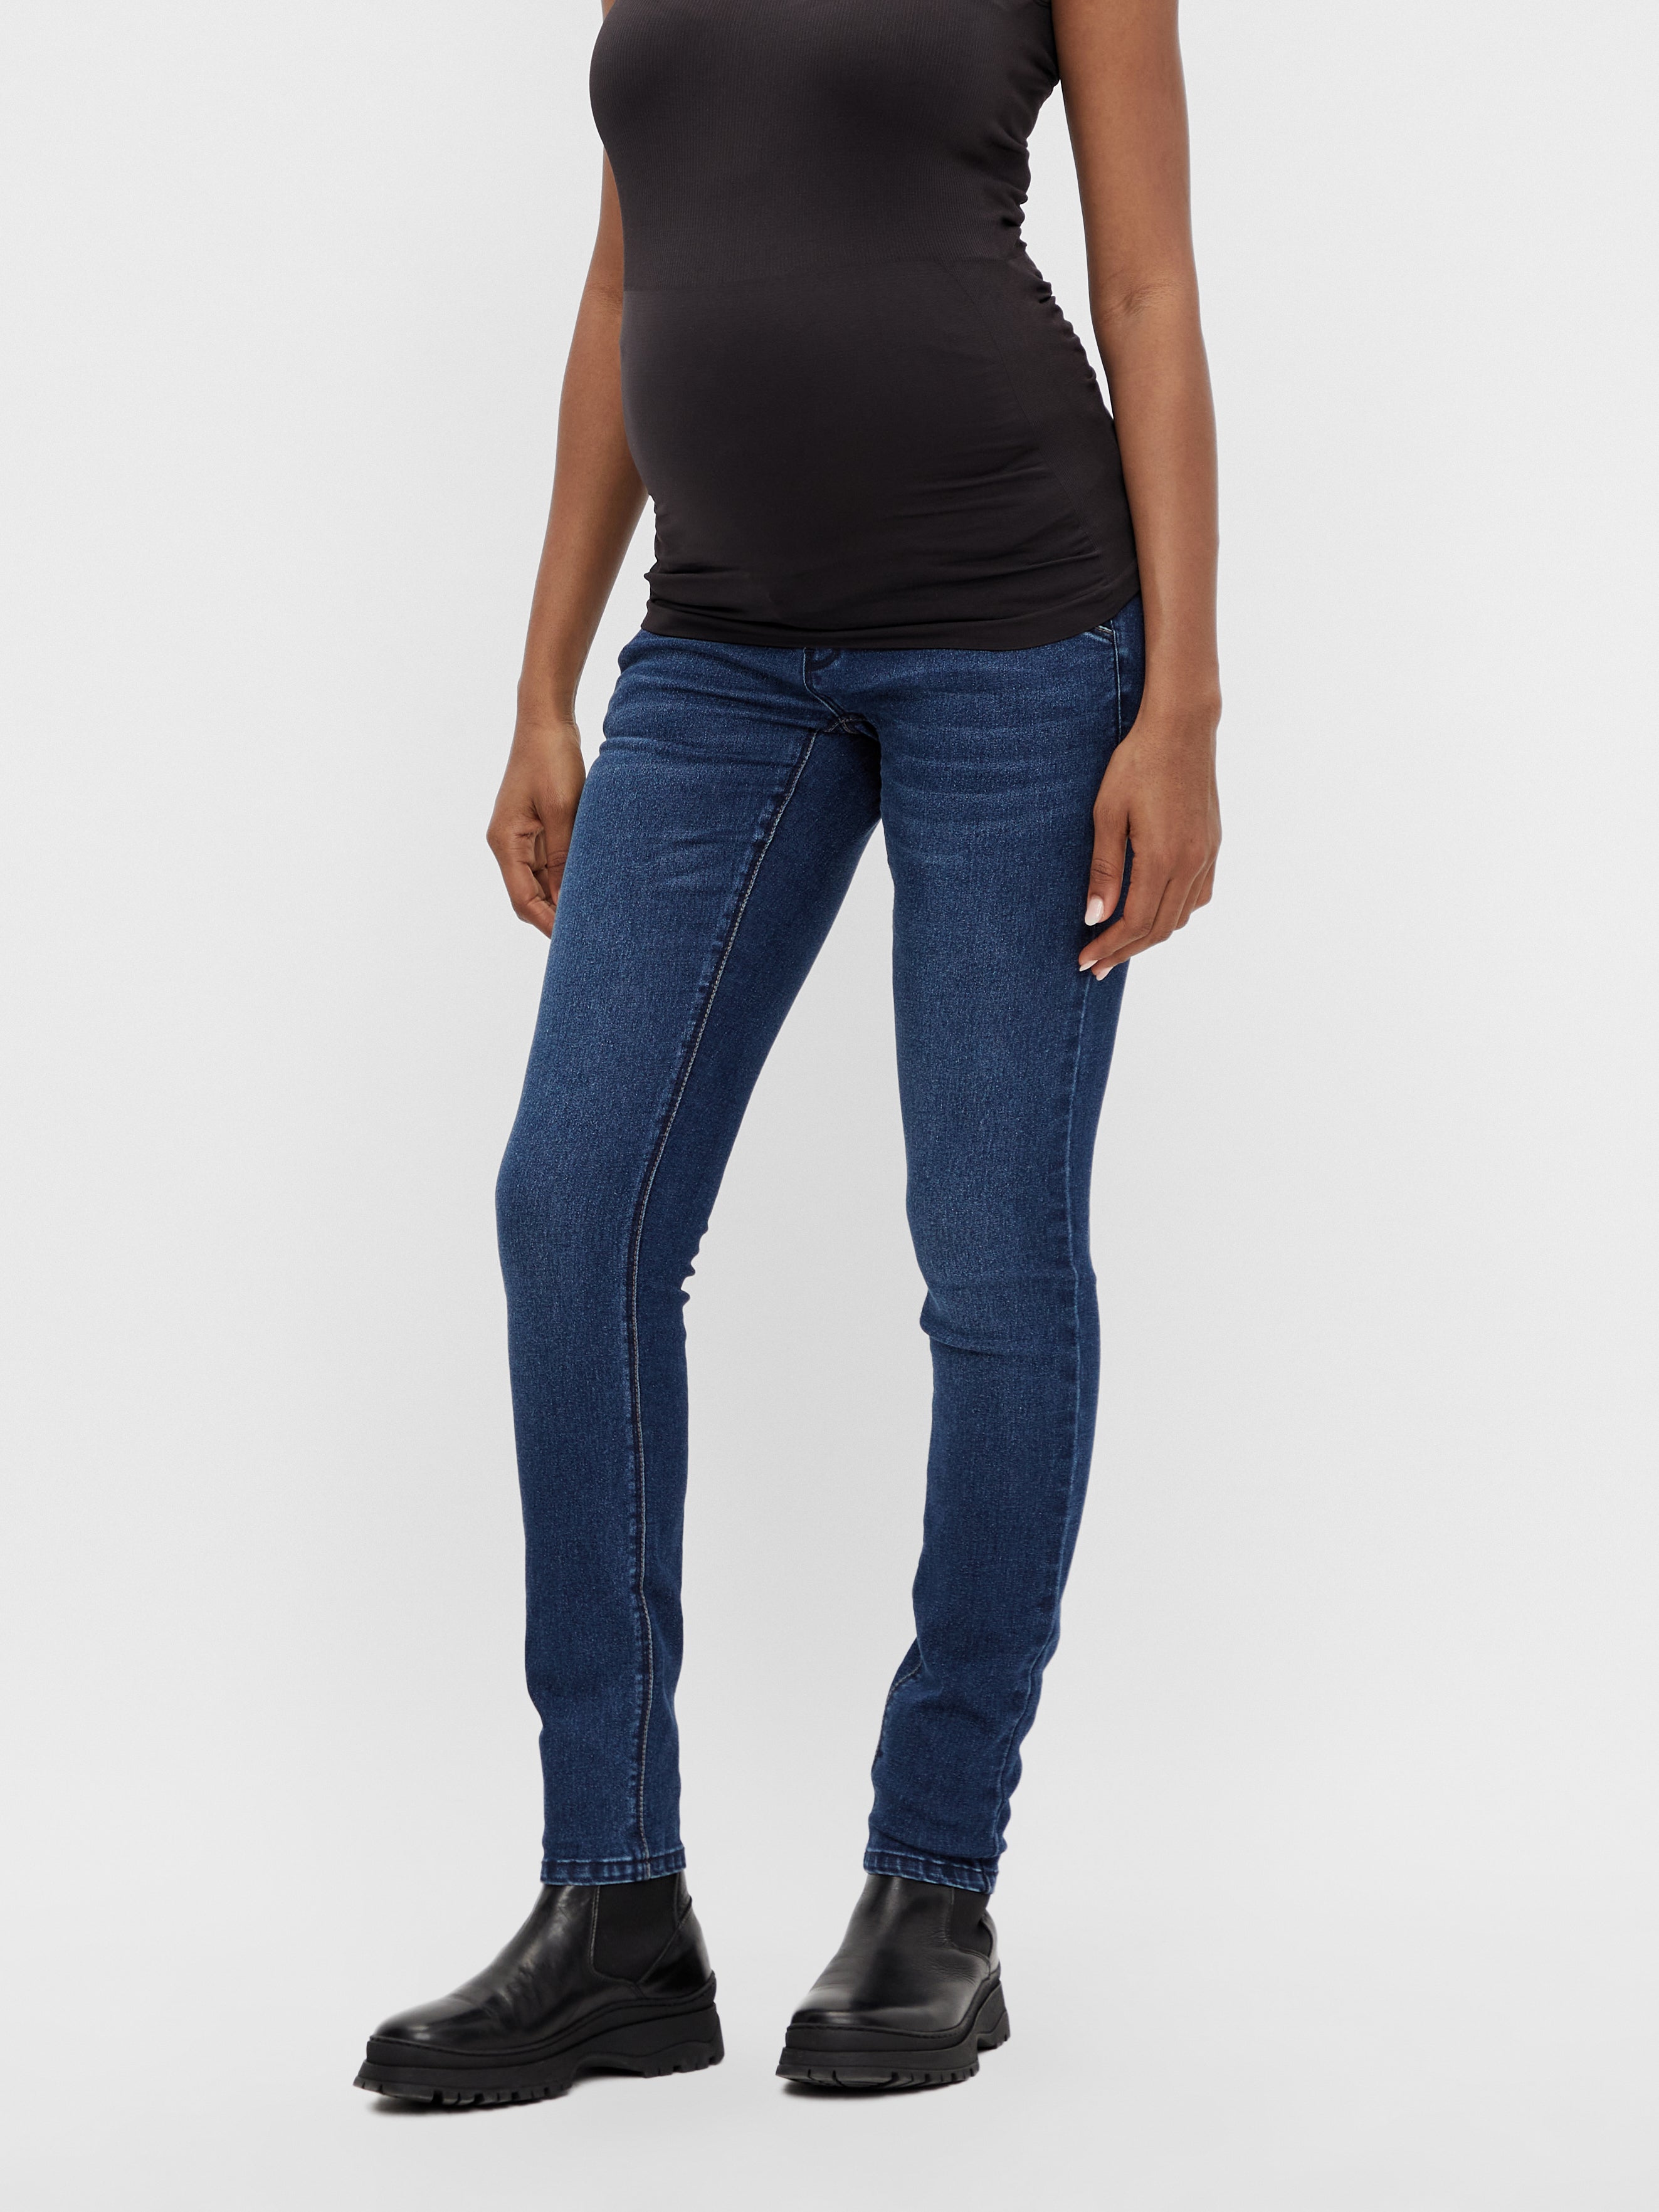 Jeans 20% Fit discount! Slim with